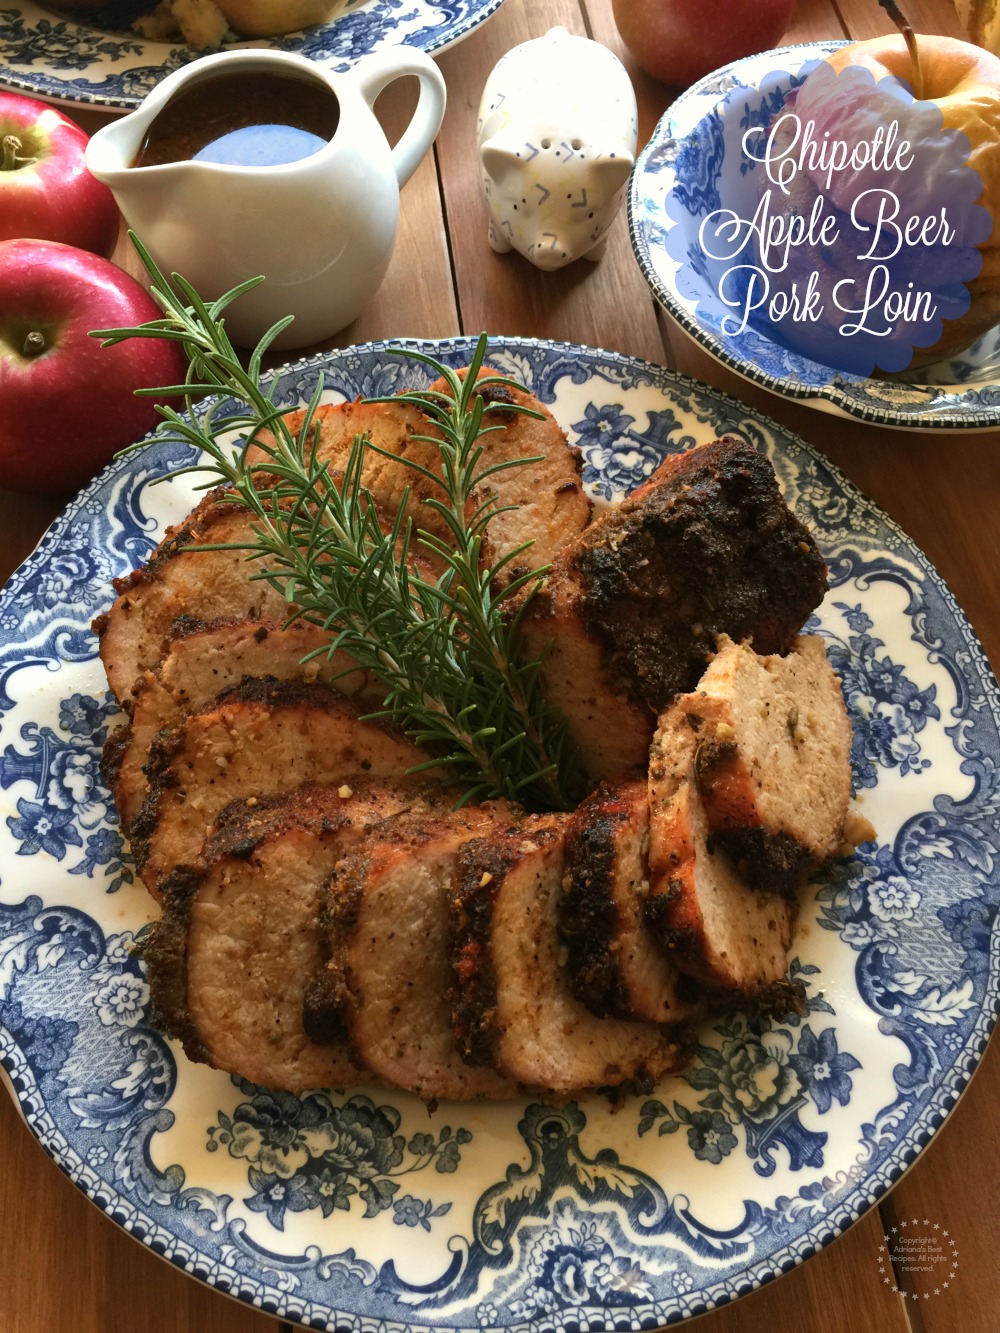 Chipotle Apple Beer Pork Loin a tasty option for any occasion